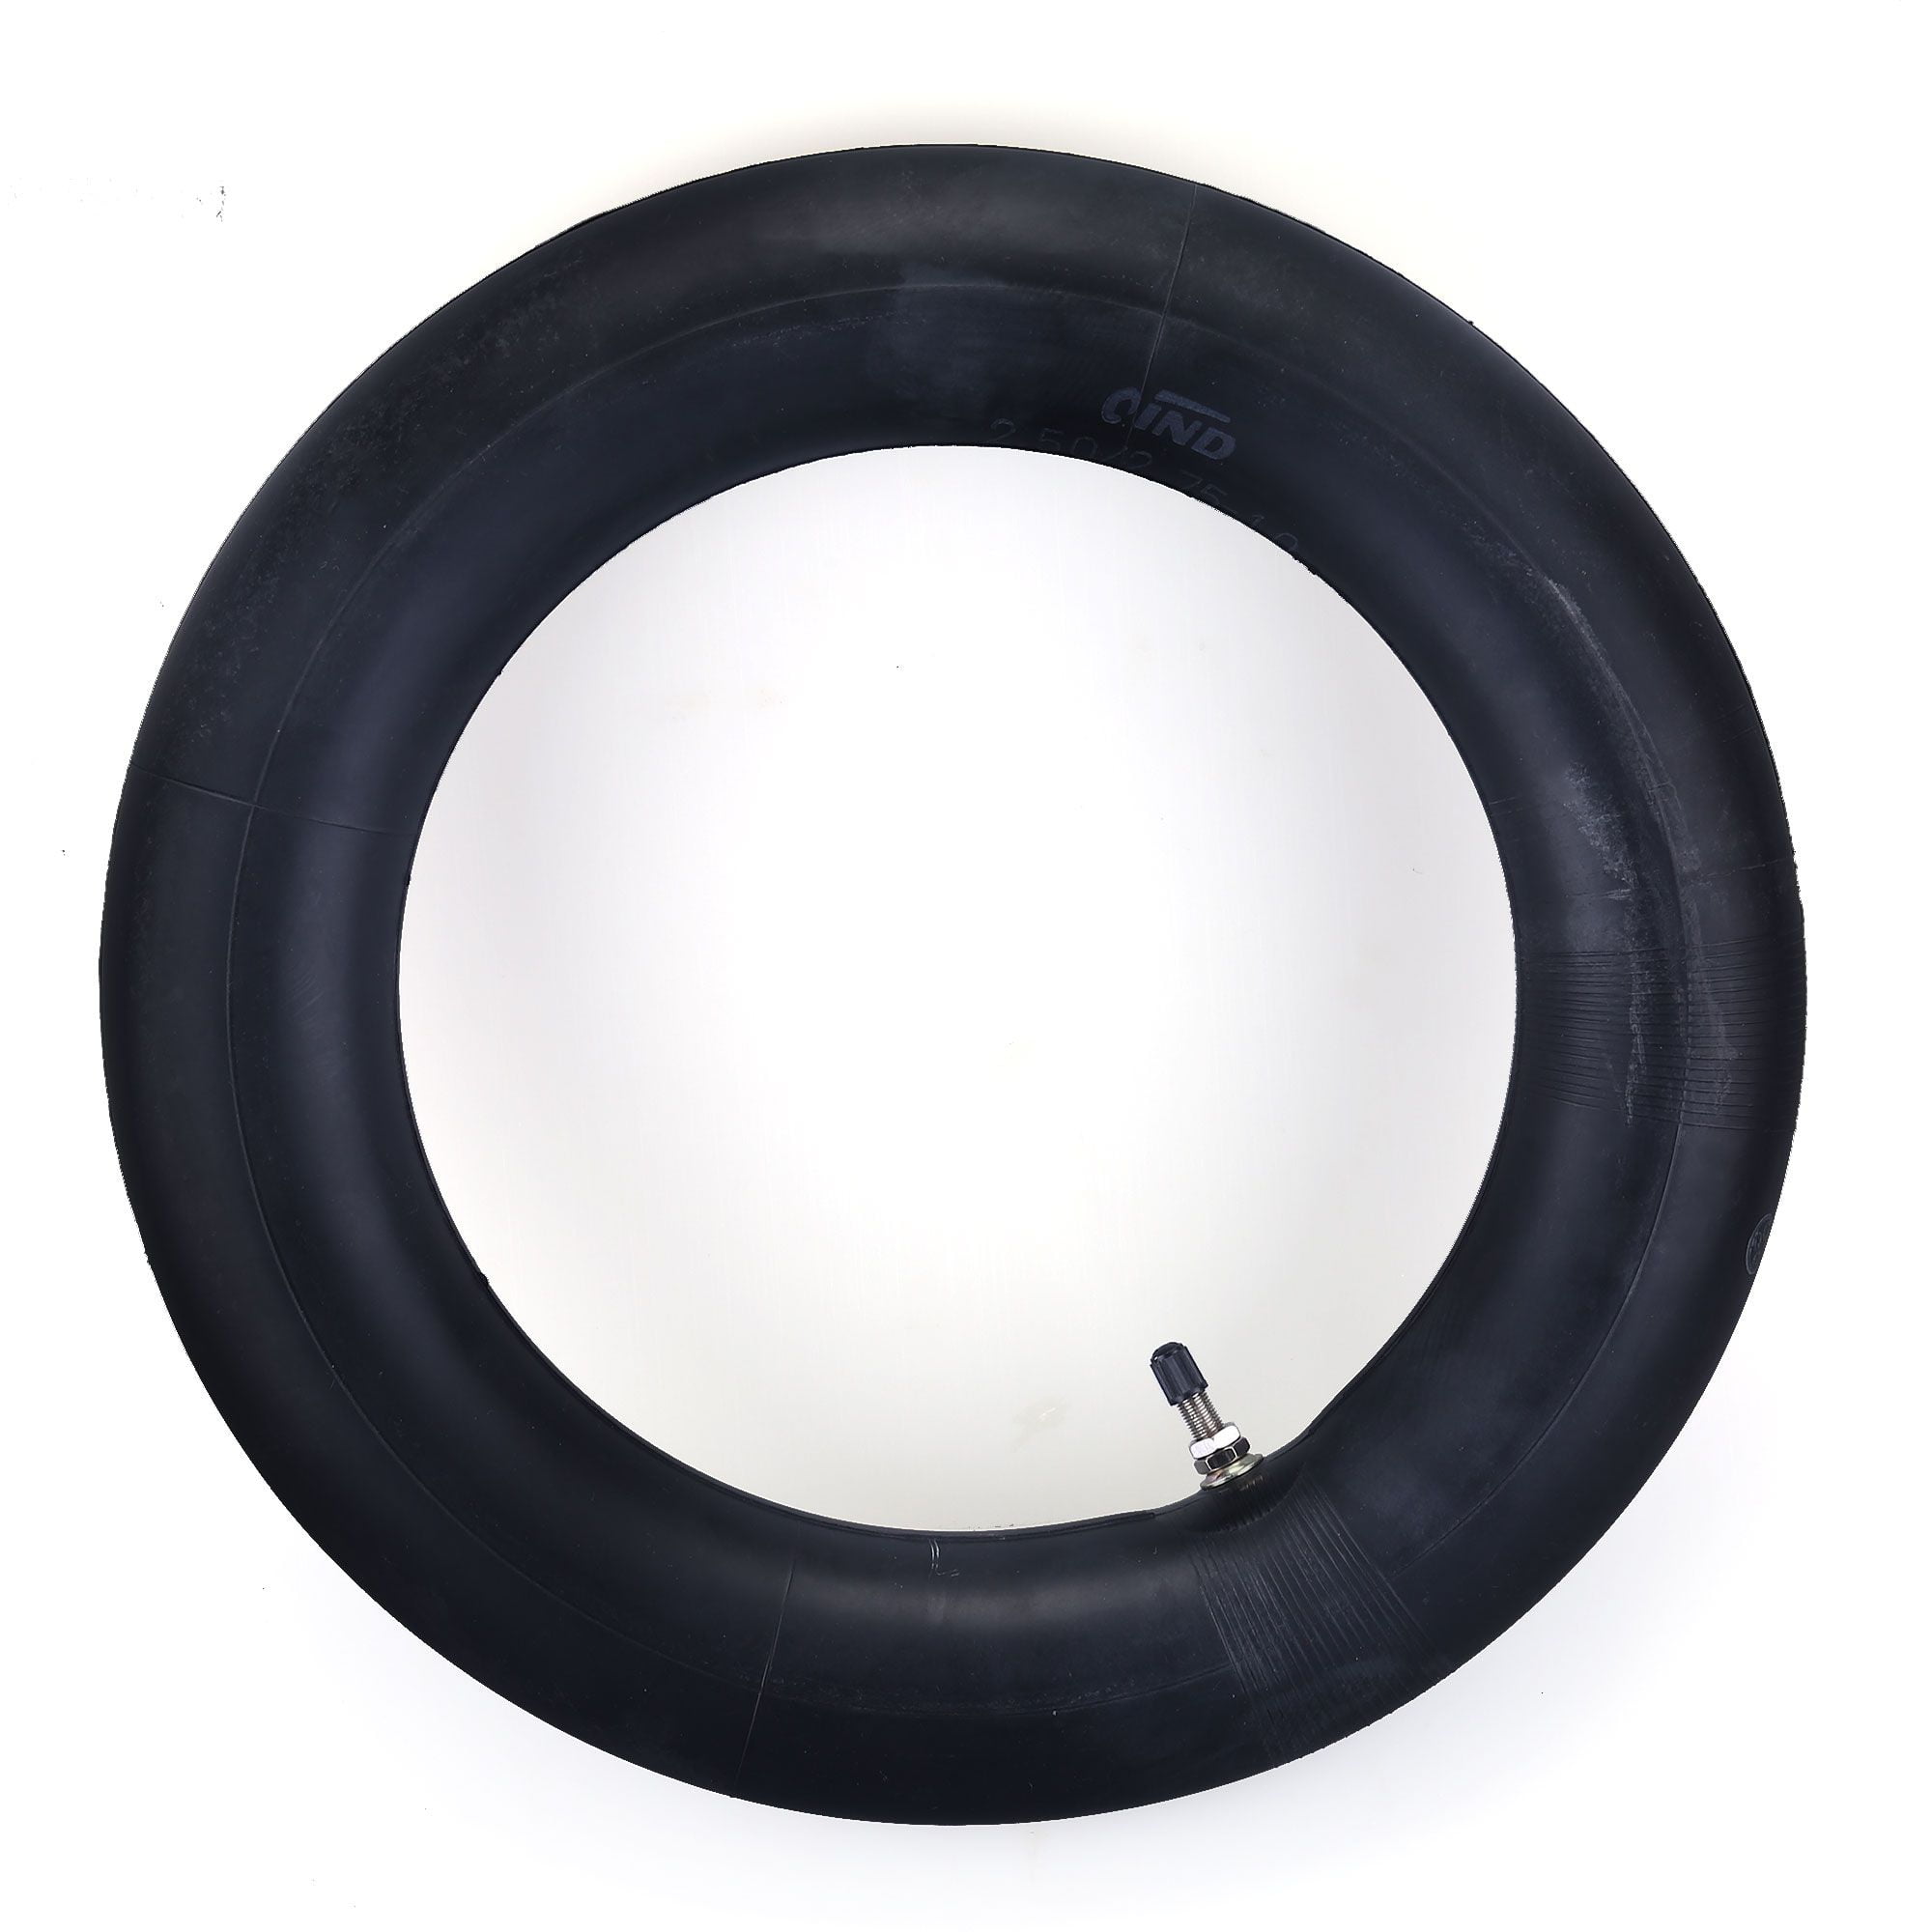 2.50-10 2.75-10 Inner Tube with straight valve stem Replacement for Honda CRF50 XR50 NB50 Yamaha PW50 Front KTM 50 Rear Tire 